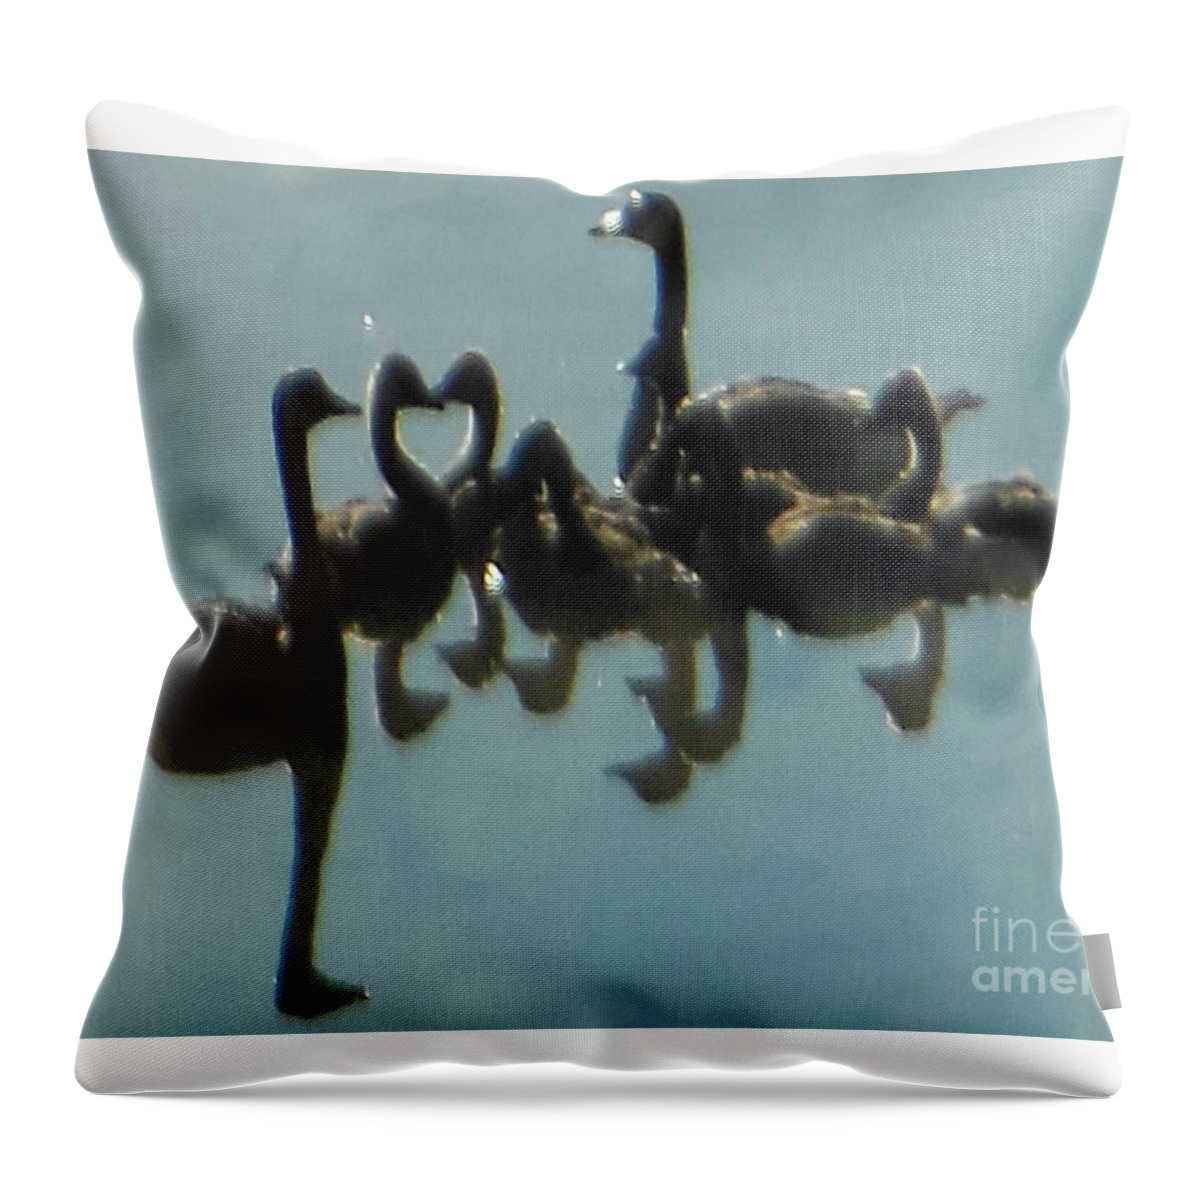 Reflection Of Geese Throw Pillow featuring the photograph Reflection of Geese by Rockin Docks Deluxephotos